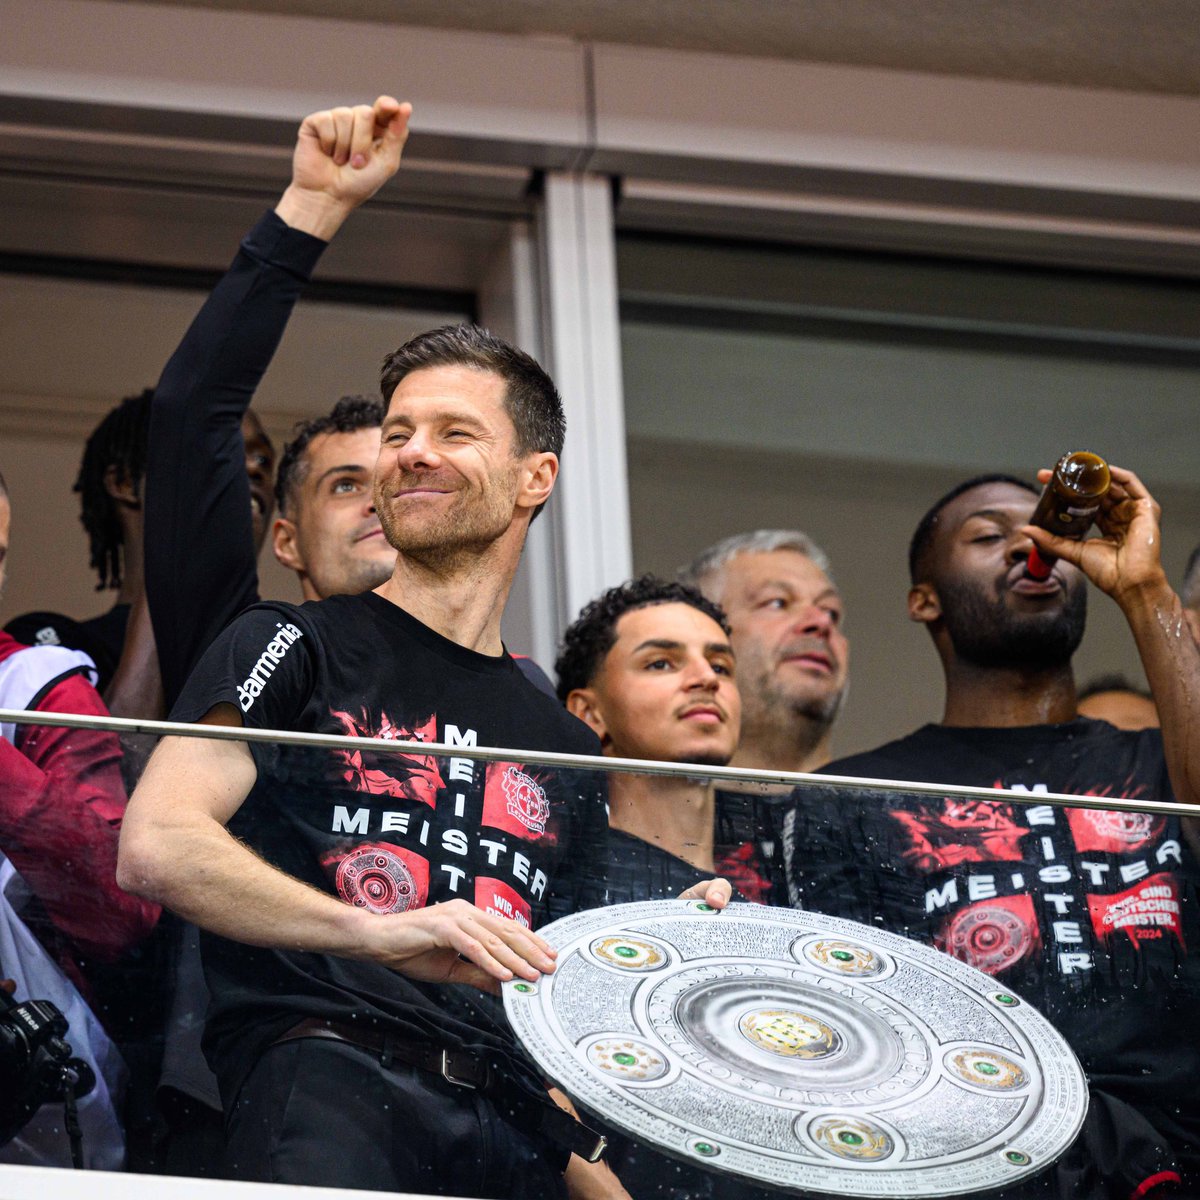 🔴⚫️🏆 First Bundesliga title in 120 years for Bayer Leverkusen. Xabi: “This is a very special moment for the club. Winning the Bundesliga for the first time in 120 years is something very special. The players are top. I am very proud of everyone”. #ZEbetNG #WeSpeakYourGame